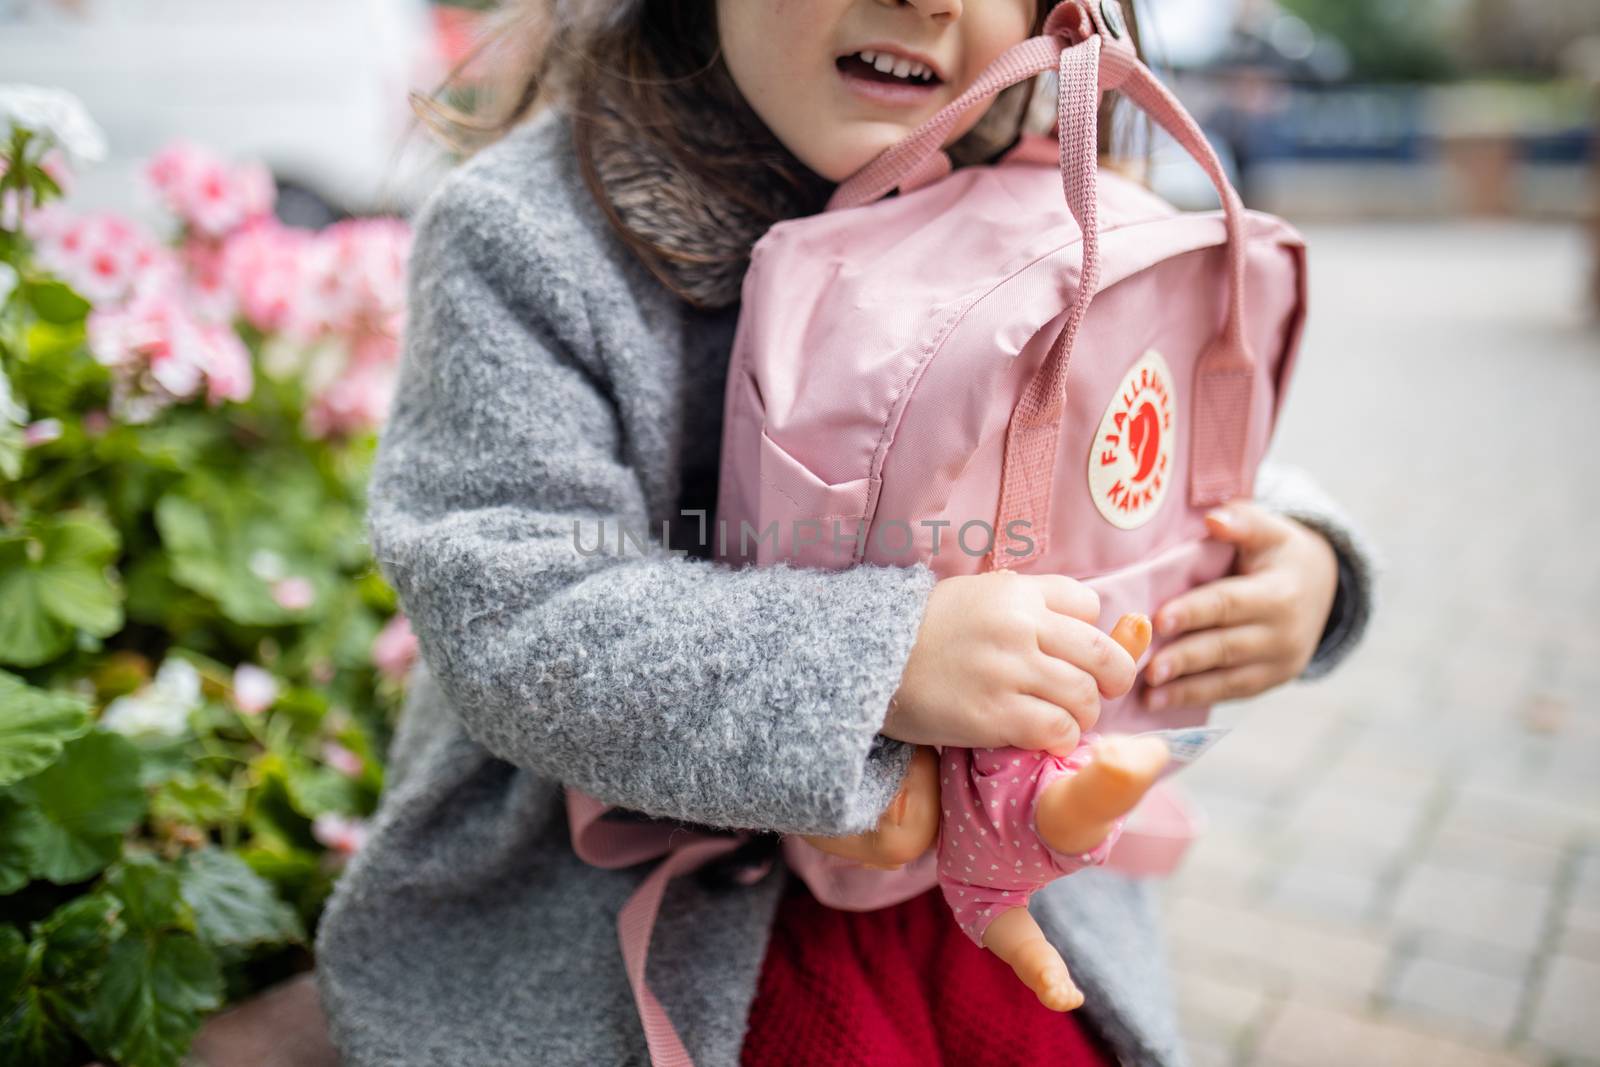 London, UK - November 4, 2020: Happy little girl with flowers behind her hugging pink Fjallraven backpack and small doll. Young child holding pink rucksack and doll. School supplies for children